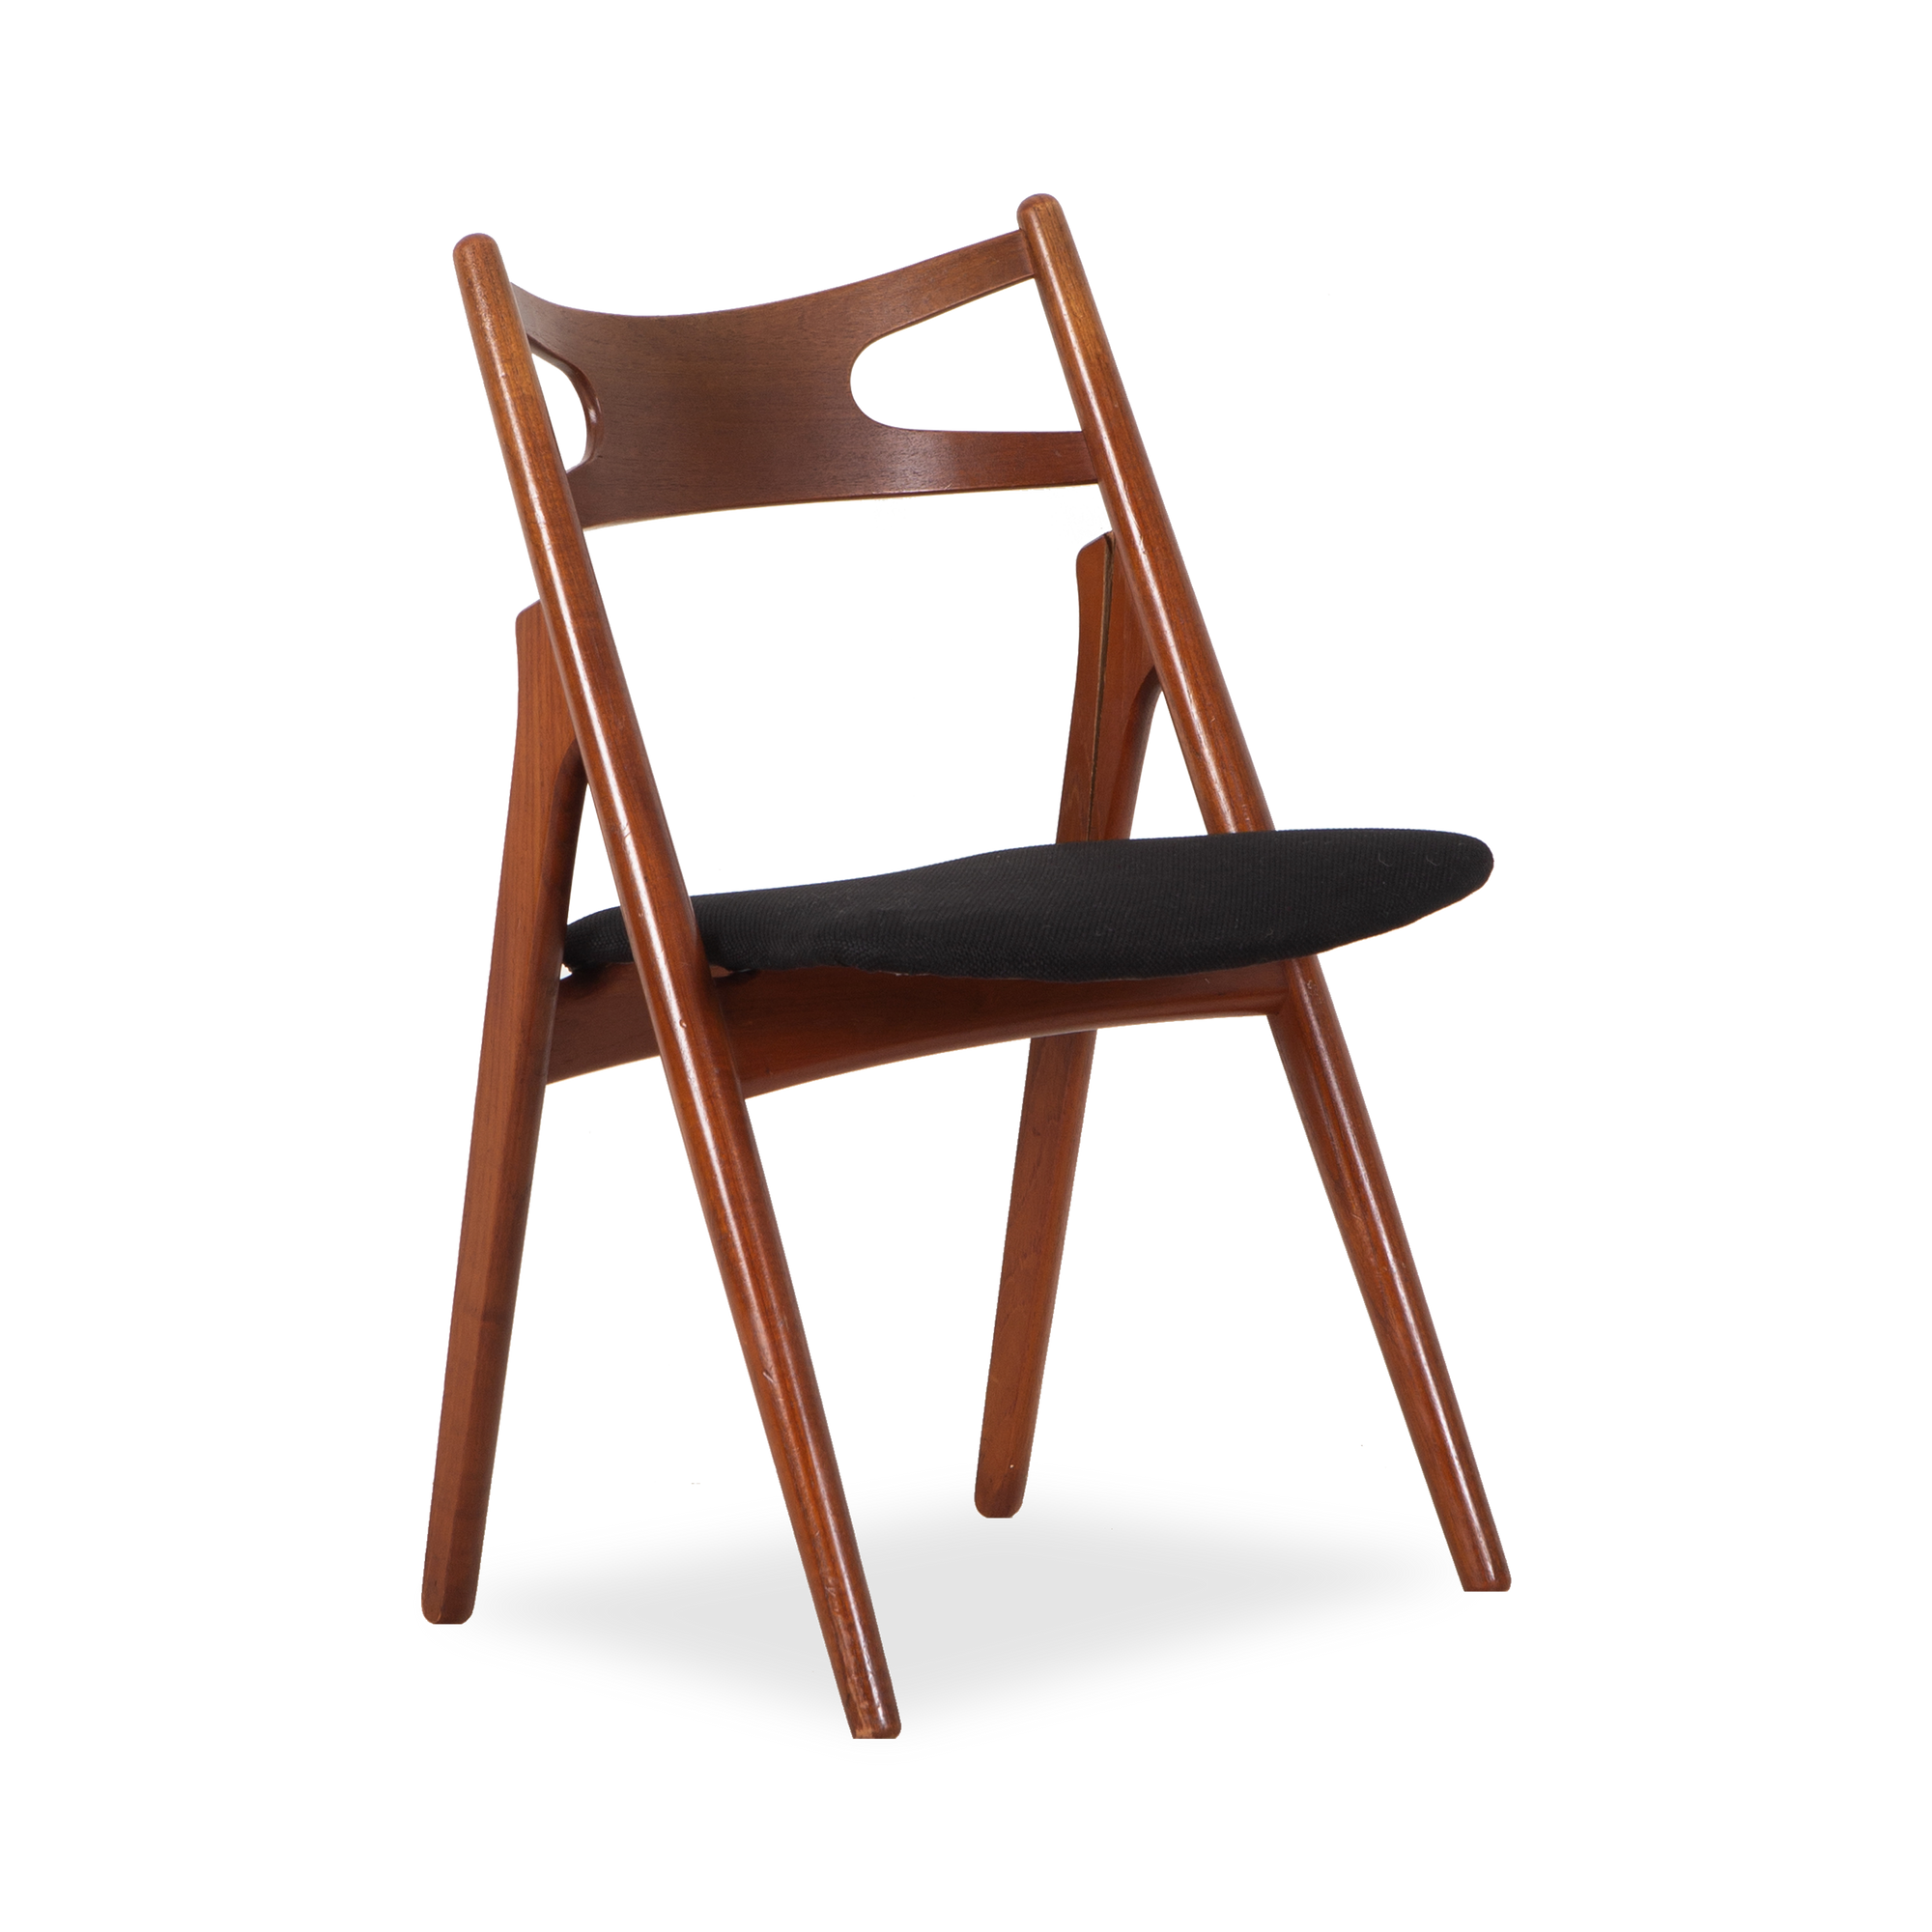 An iconic mid-century chair, this vintage CH-29 Sawbuck Chair was designed by Hans Wegner and manufactured by Carl Hansen and Son.